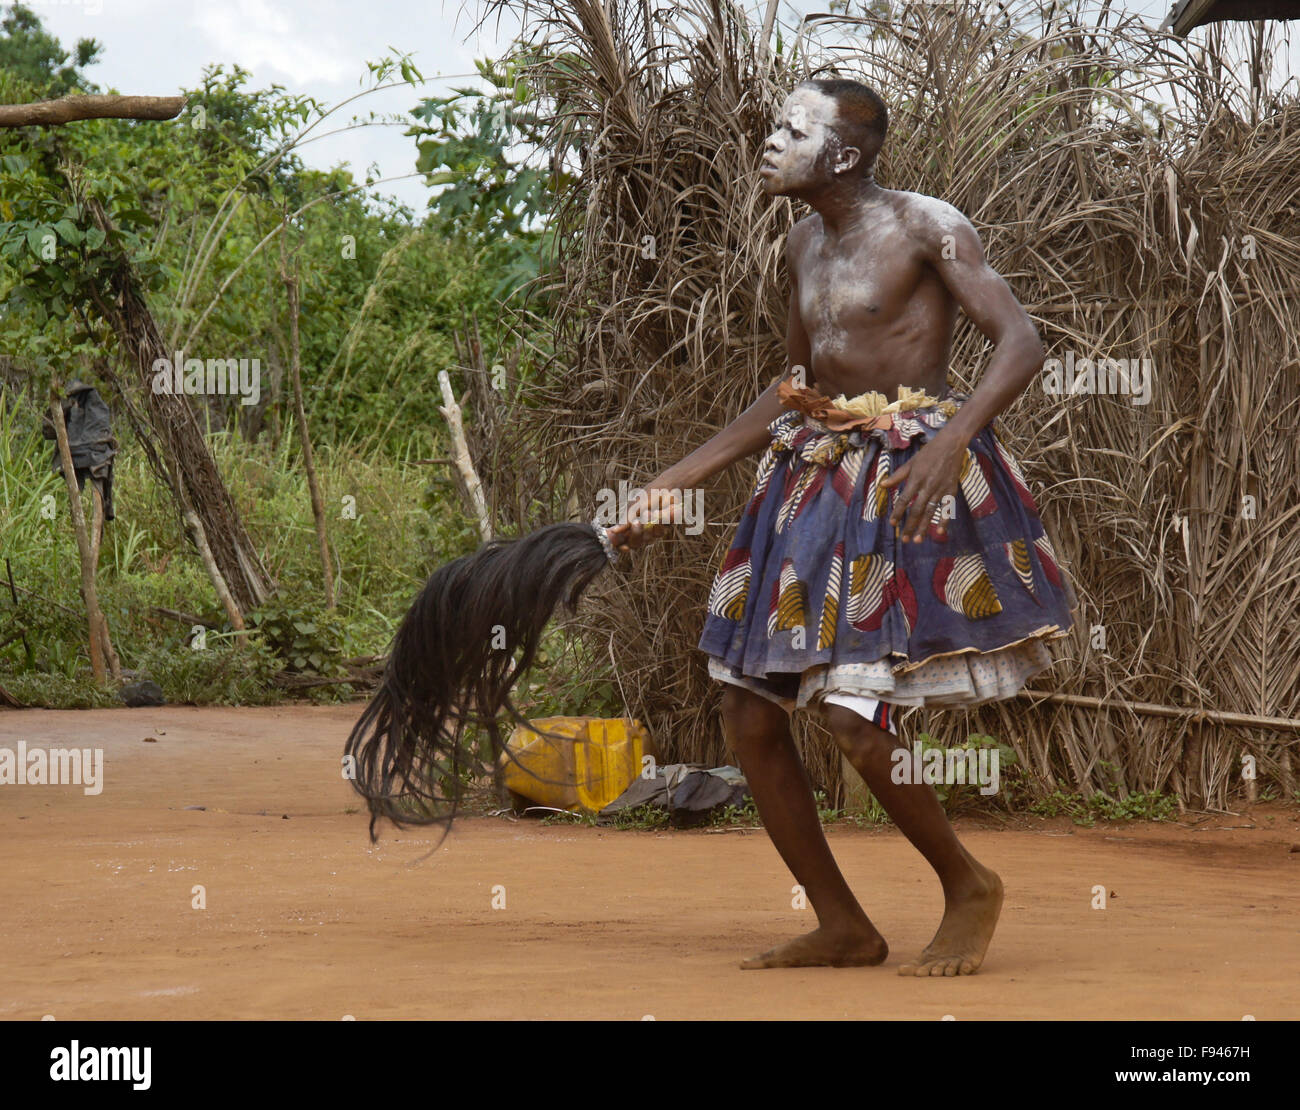 Vodun (voodoo) ceremony for Gambada divinity, where this man is possessed by a spirit, village near Abomey, Benin Stock Photo